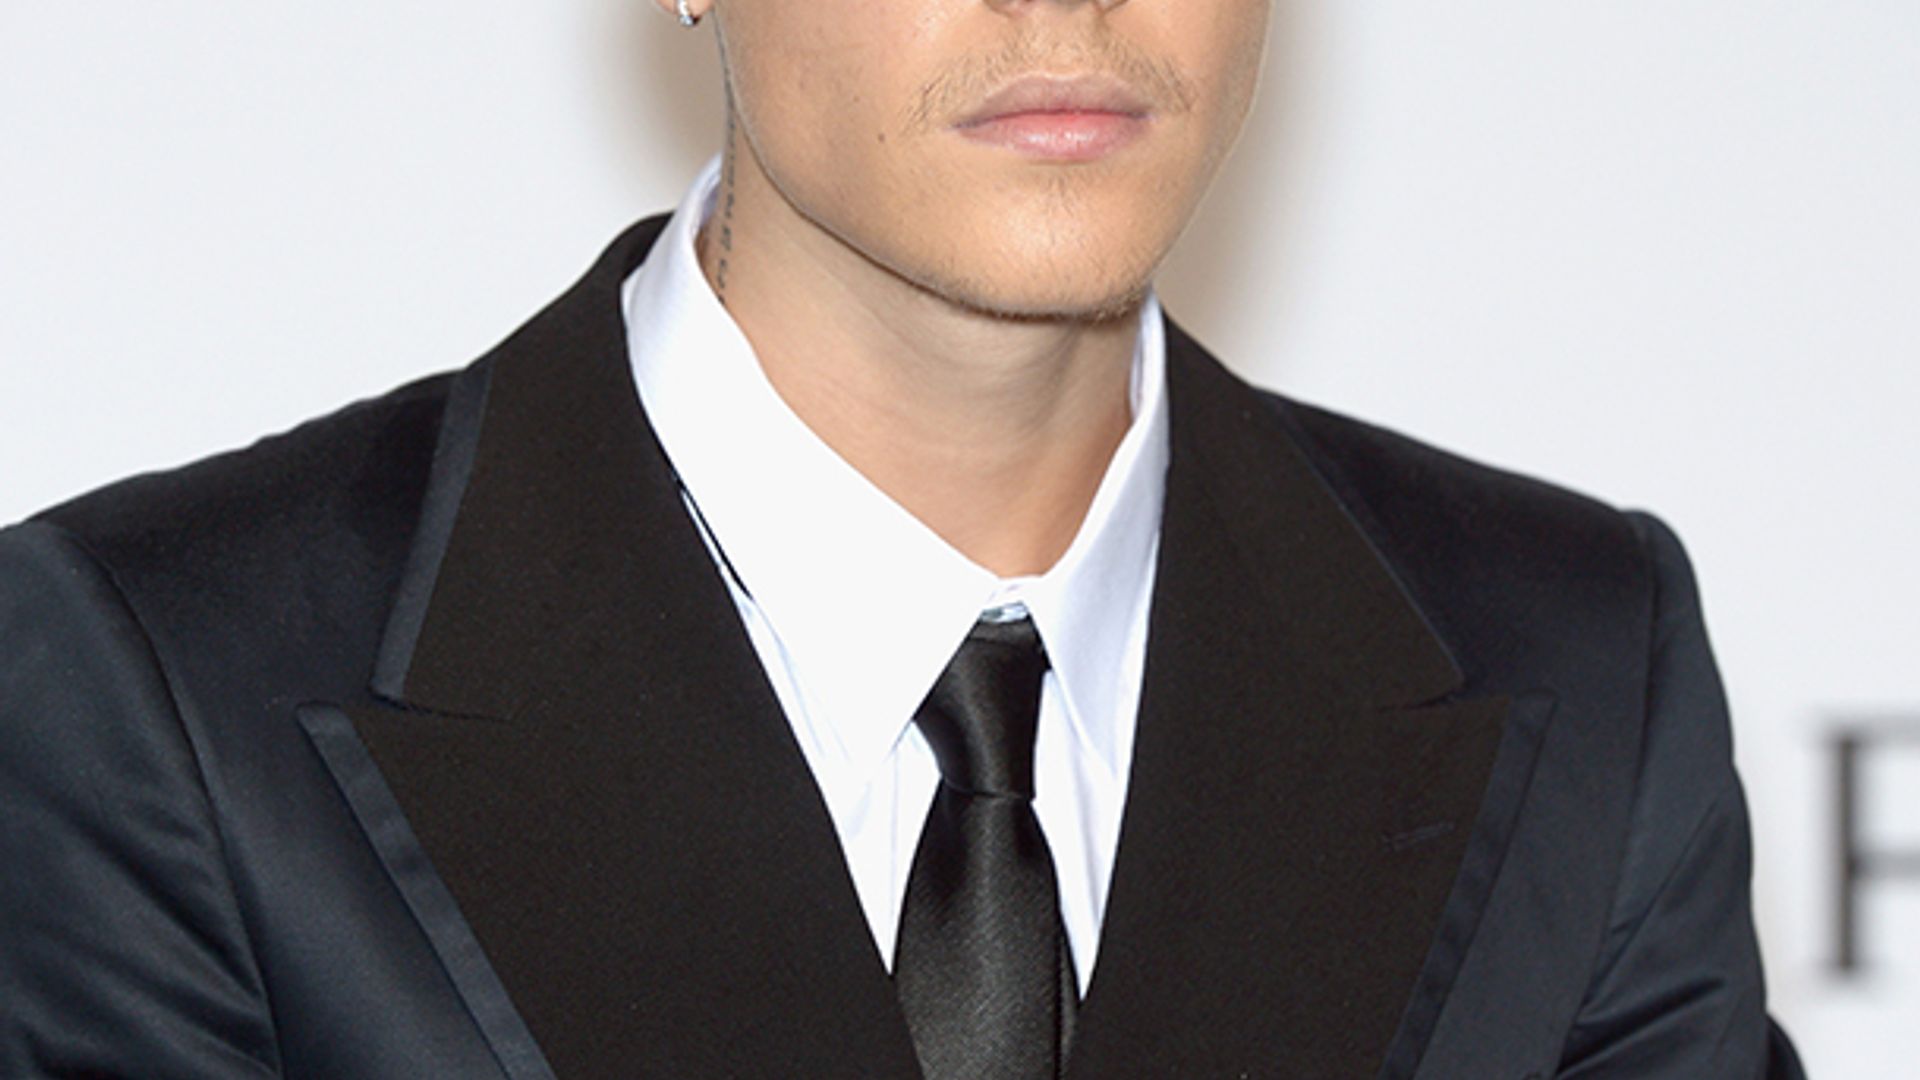 Justin Bieber apologises for racist joke: 'I didn't understand the power of certain words'